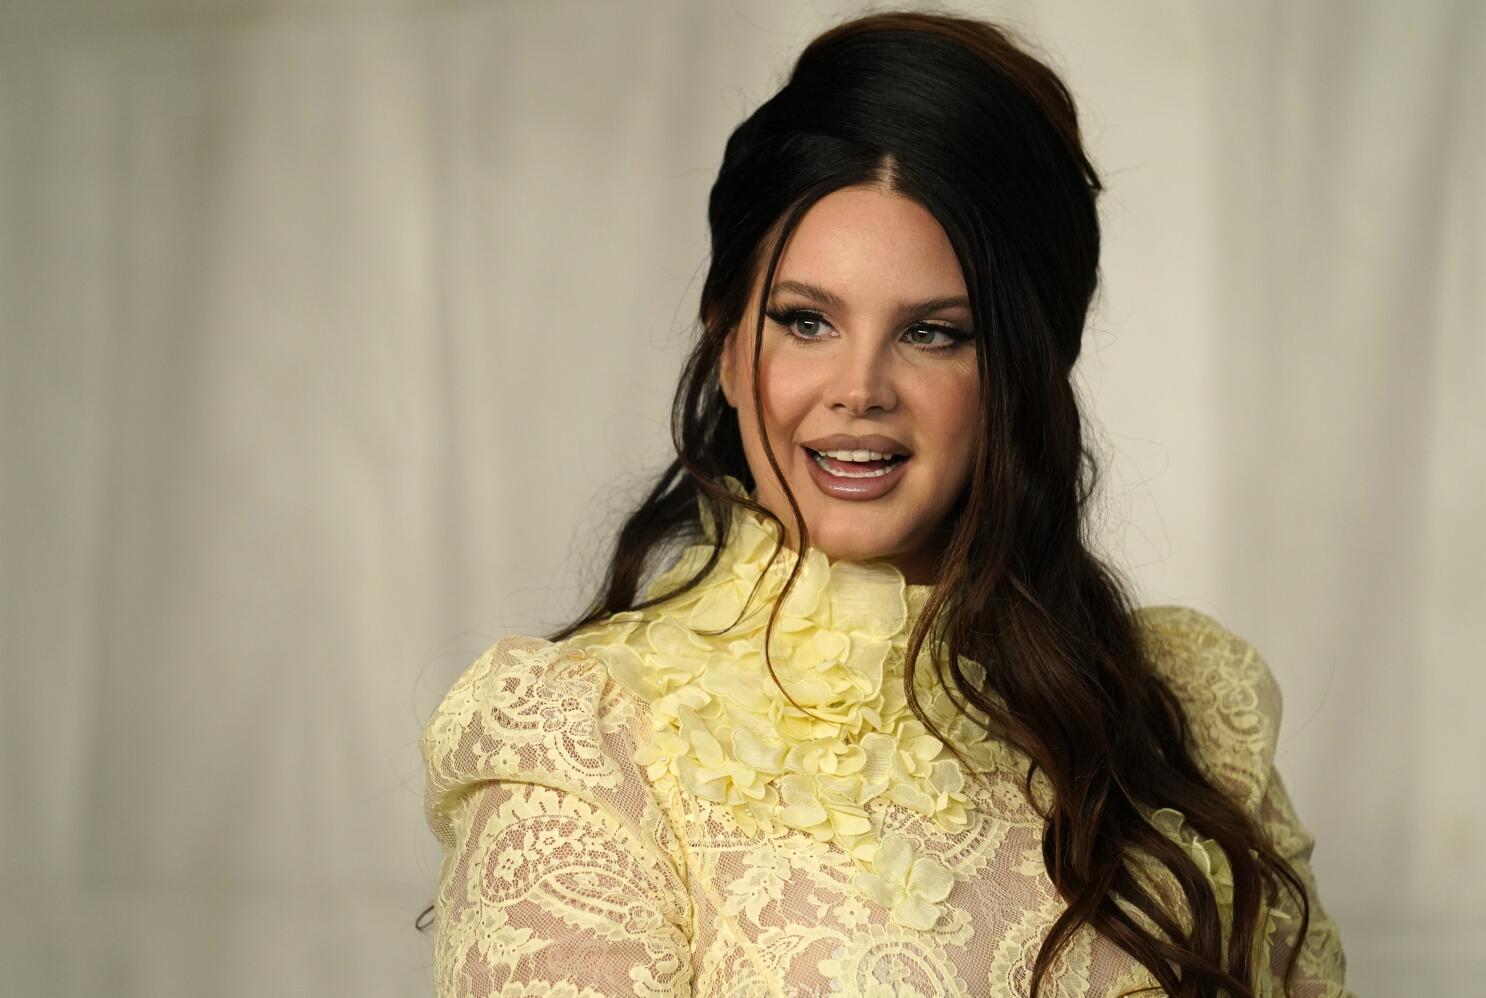 Where Does Lana Del Rey Live? Details on the Singer's Home